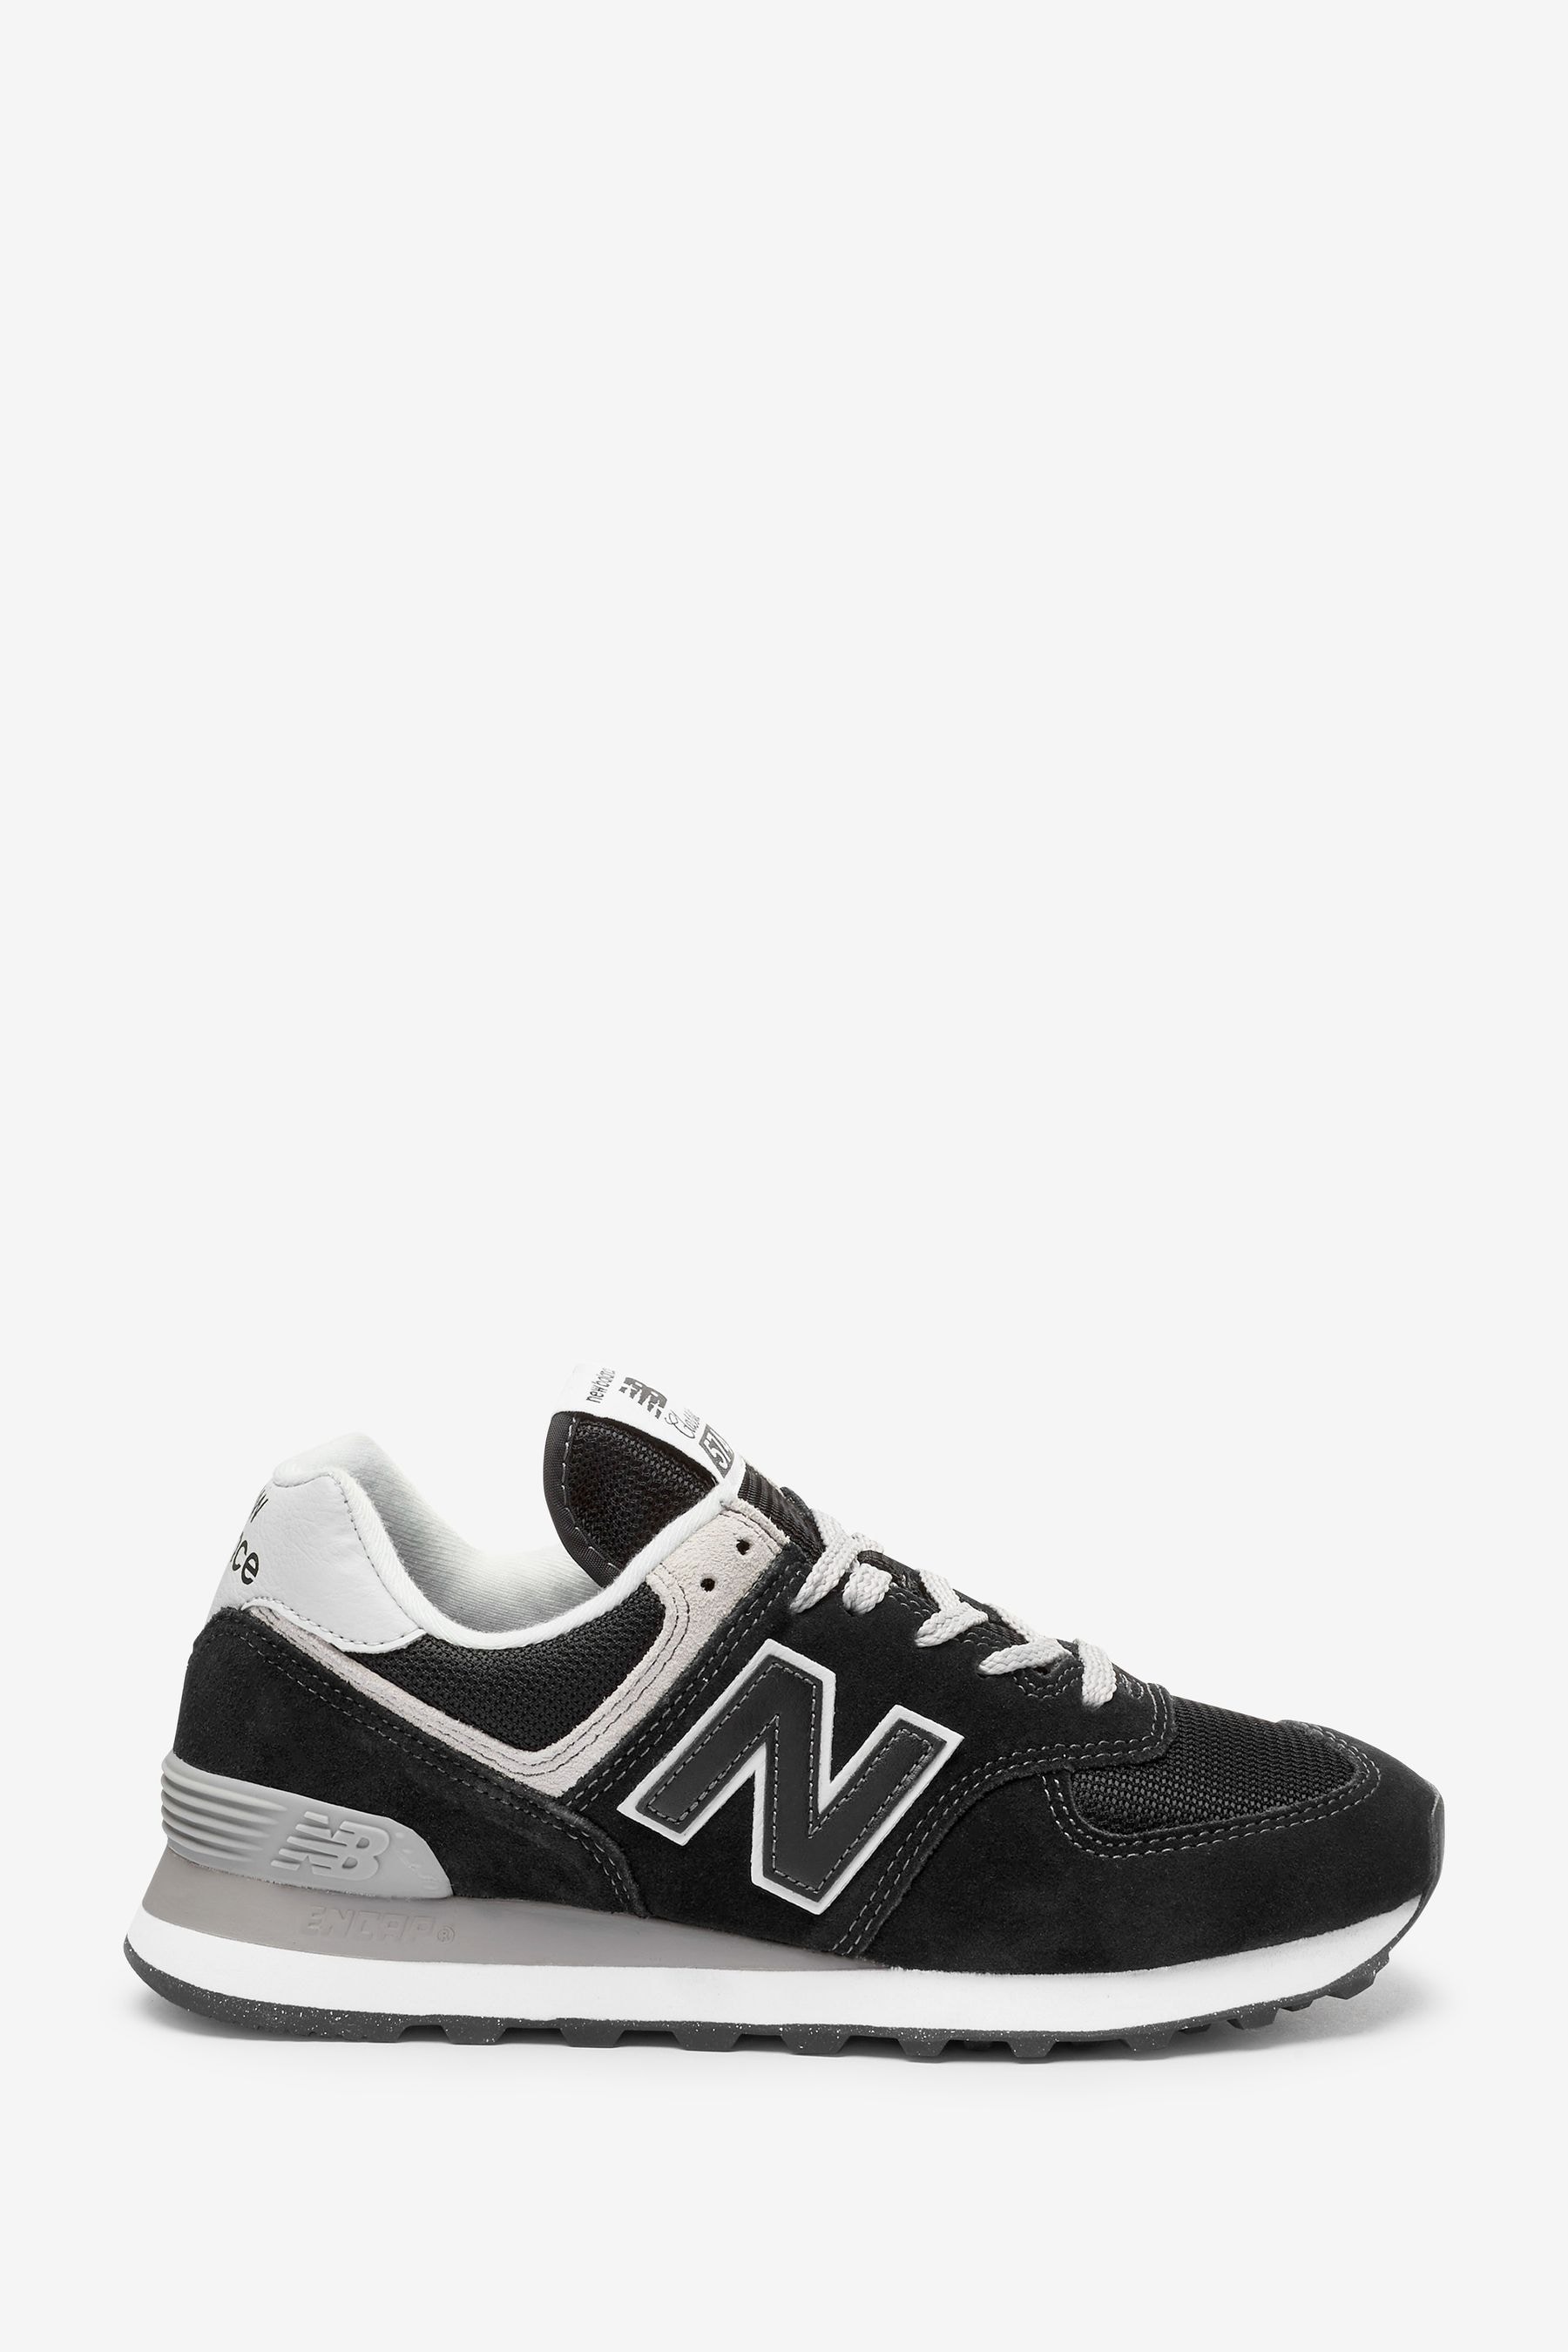 Buy New Balance Black Mens 574 Trainers from the Next UK online shop